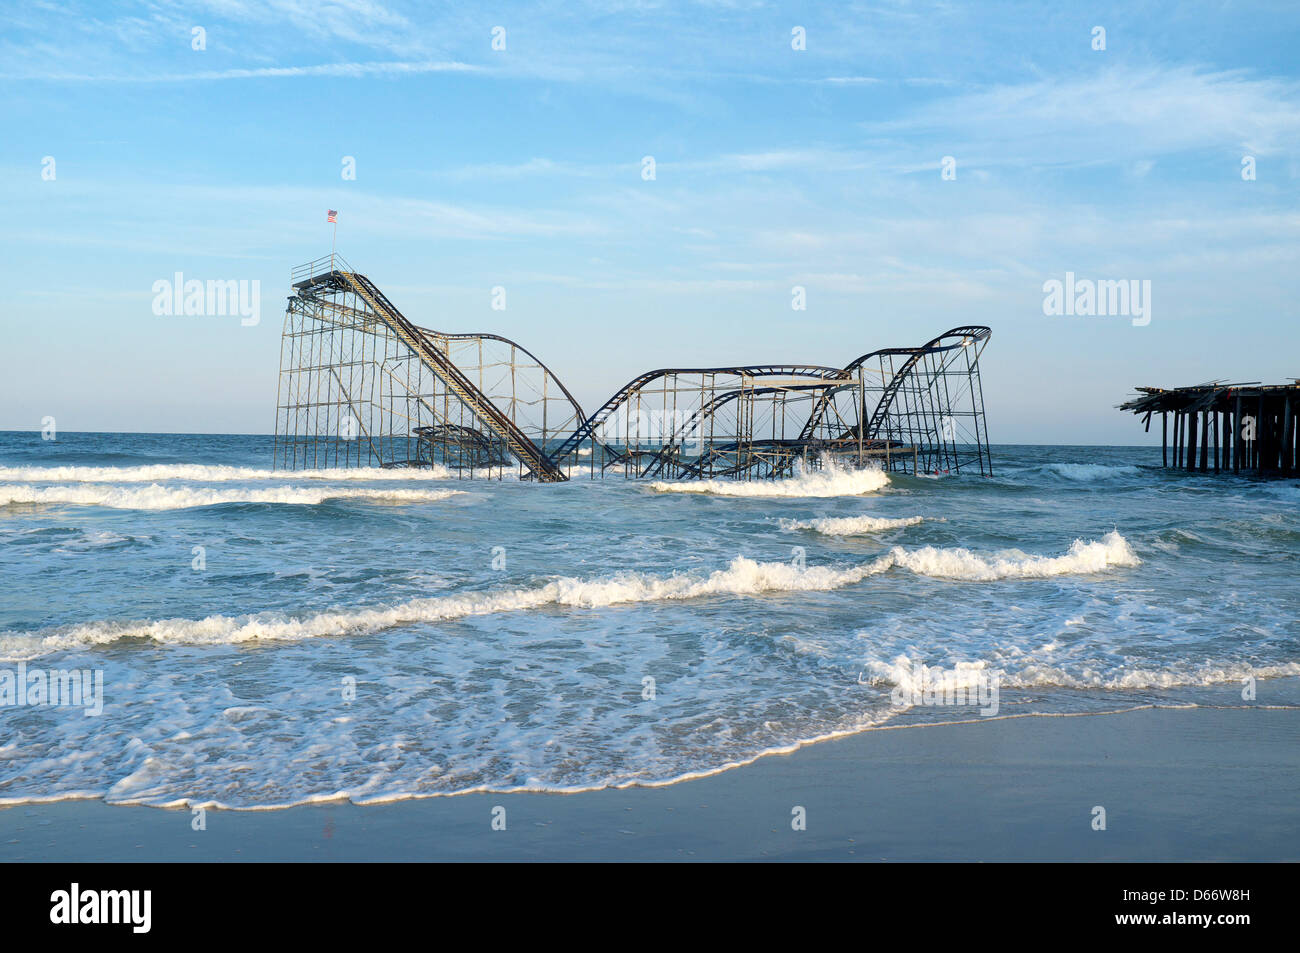 The Jet Star roller coaster still sets in the Atlantic Ocean in Seaside Heights, NJ USA.  The roller coaster was deposited there by Hurricane Sandy in October 2012 and was removed in May of 2013 Stock Photo